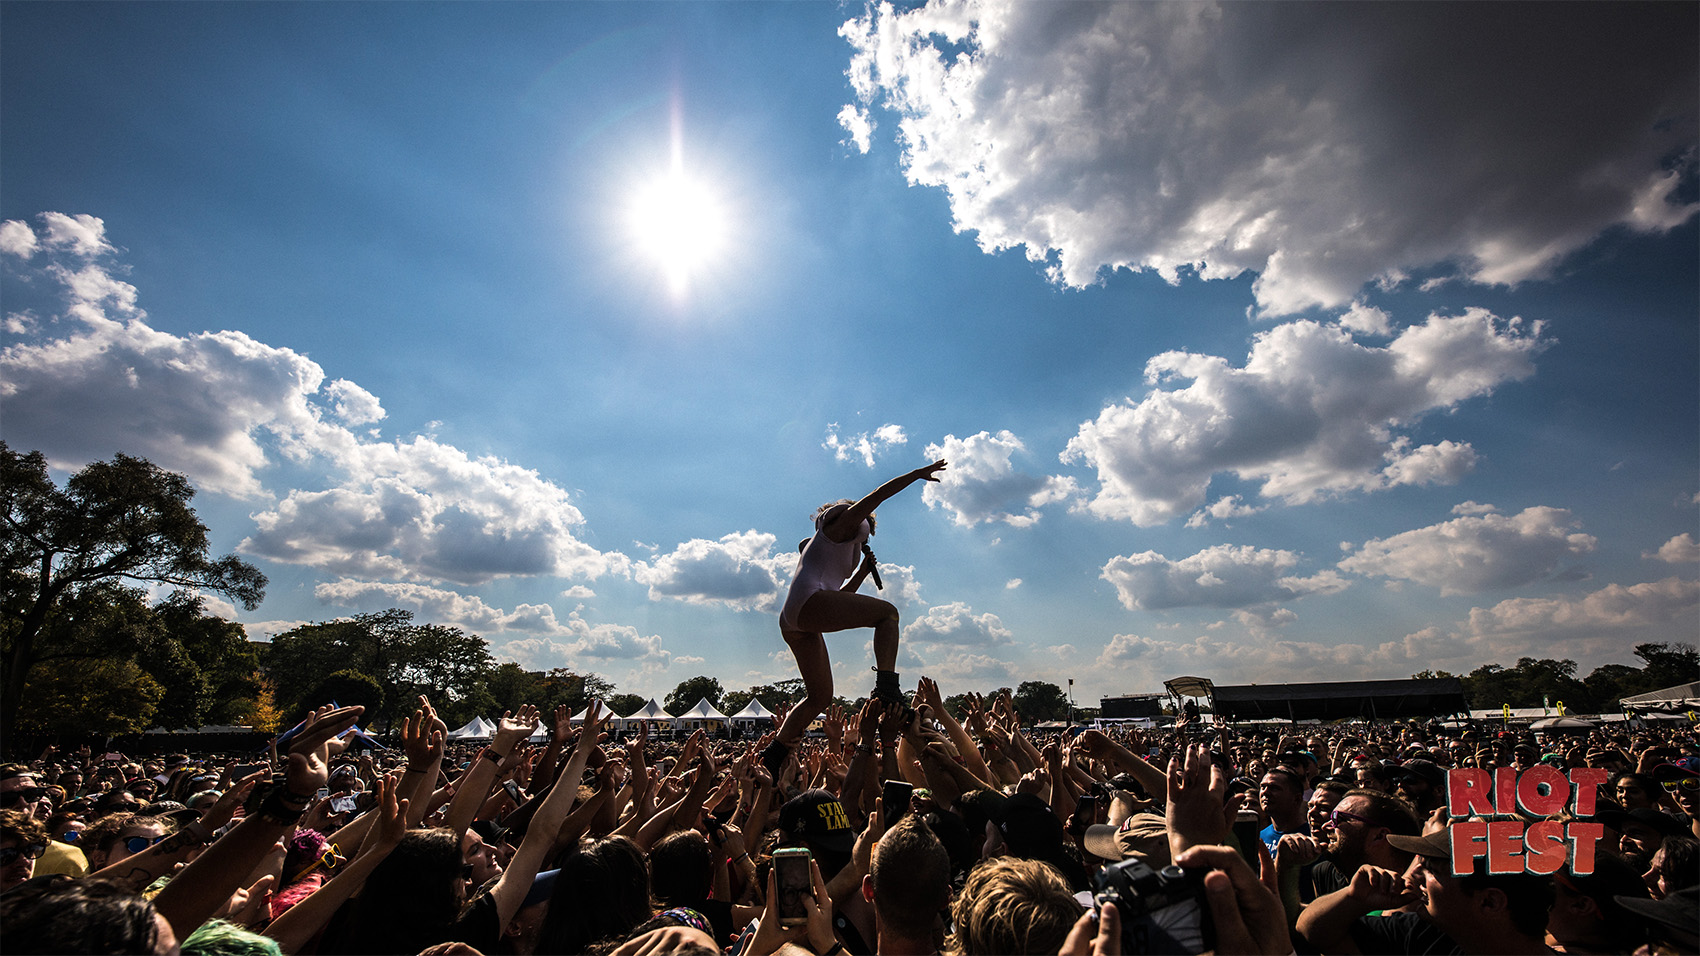 The Wide World of Riot Fest is Truly A Sight to Behold.